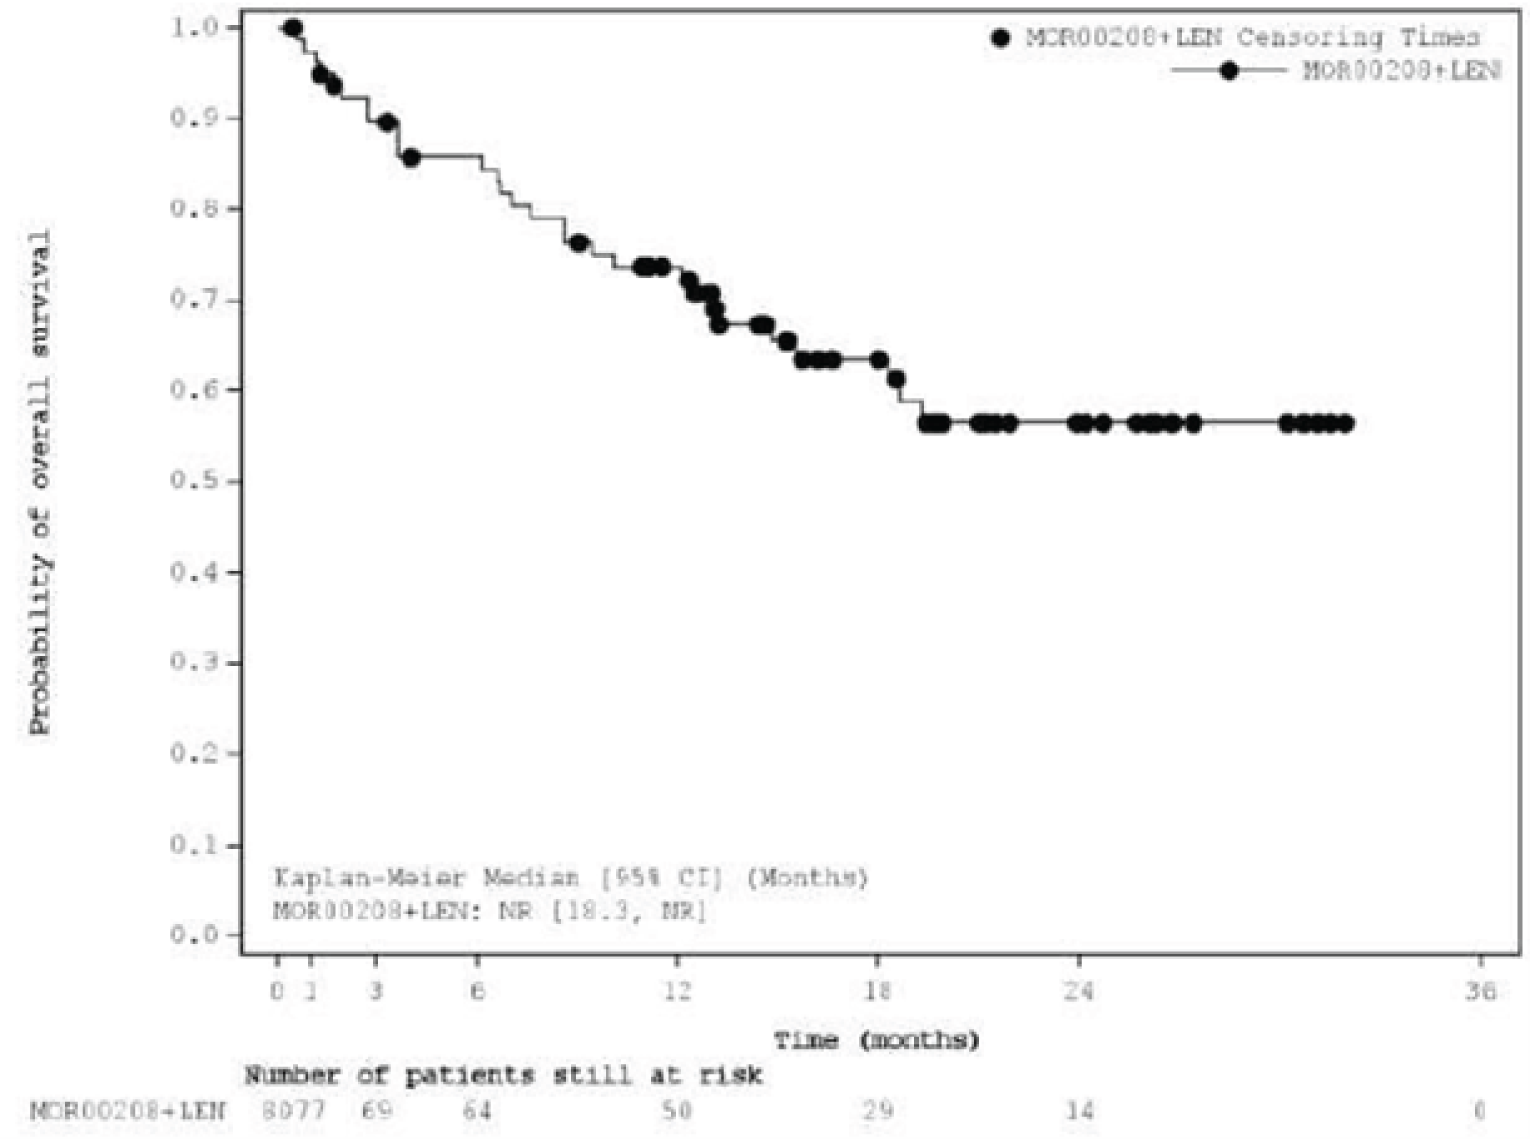 Kaplan–Meier curve of OS from month 0, with 80 patients still at risk, until month 36, with 0 patients still at risk. The curve decreases until it plateaus at approximately 18 months, when 29 patients were still at risk.